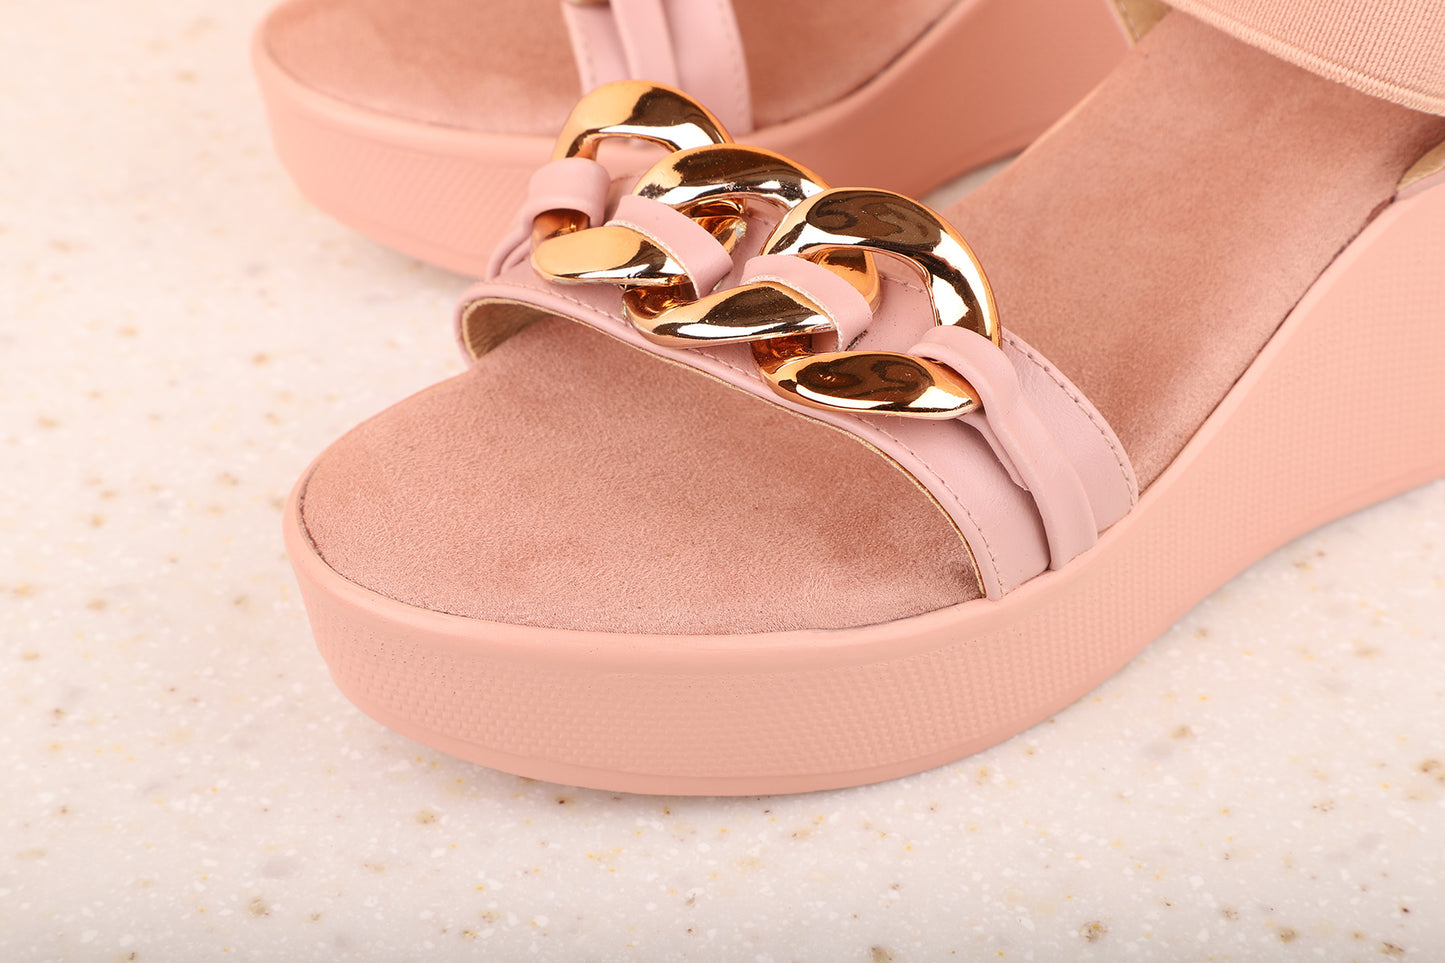 Women Peach Wedge Mules With Fitting